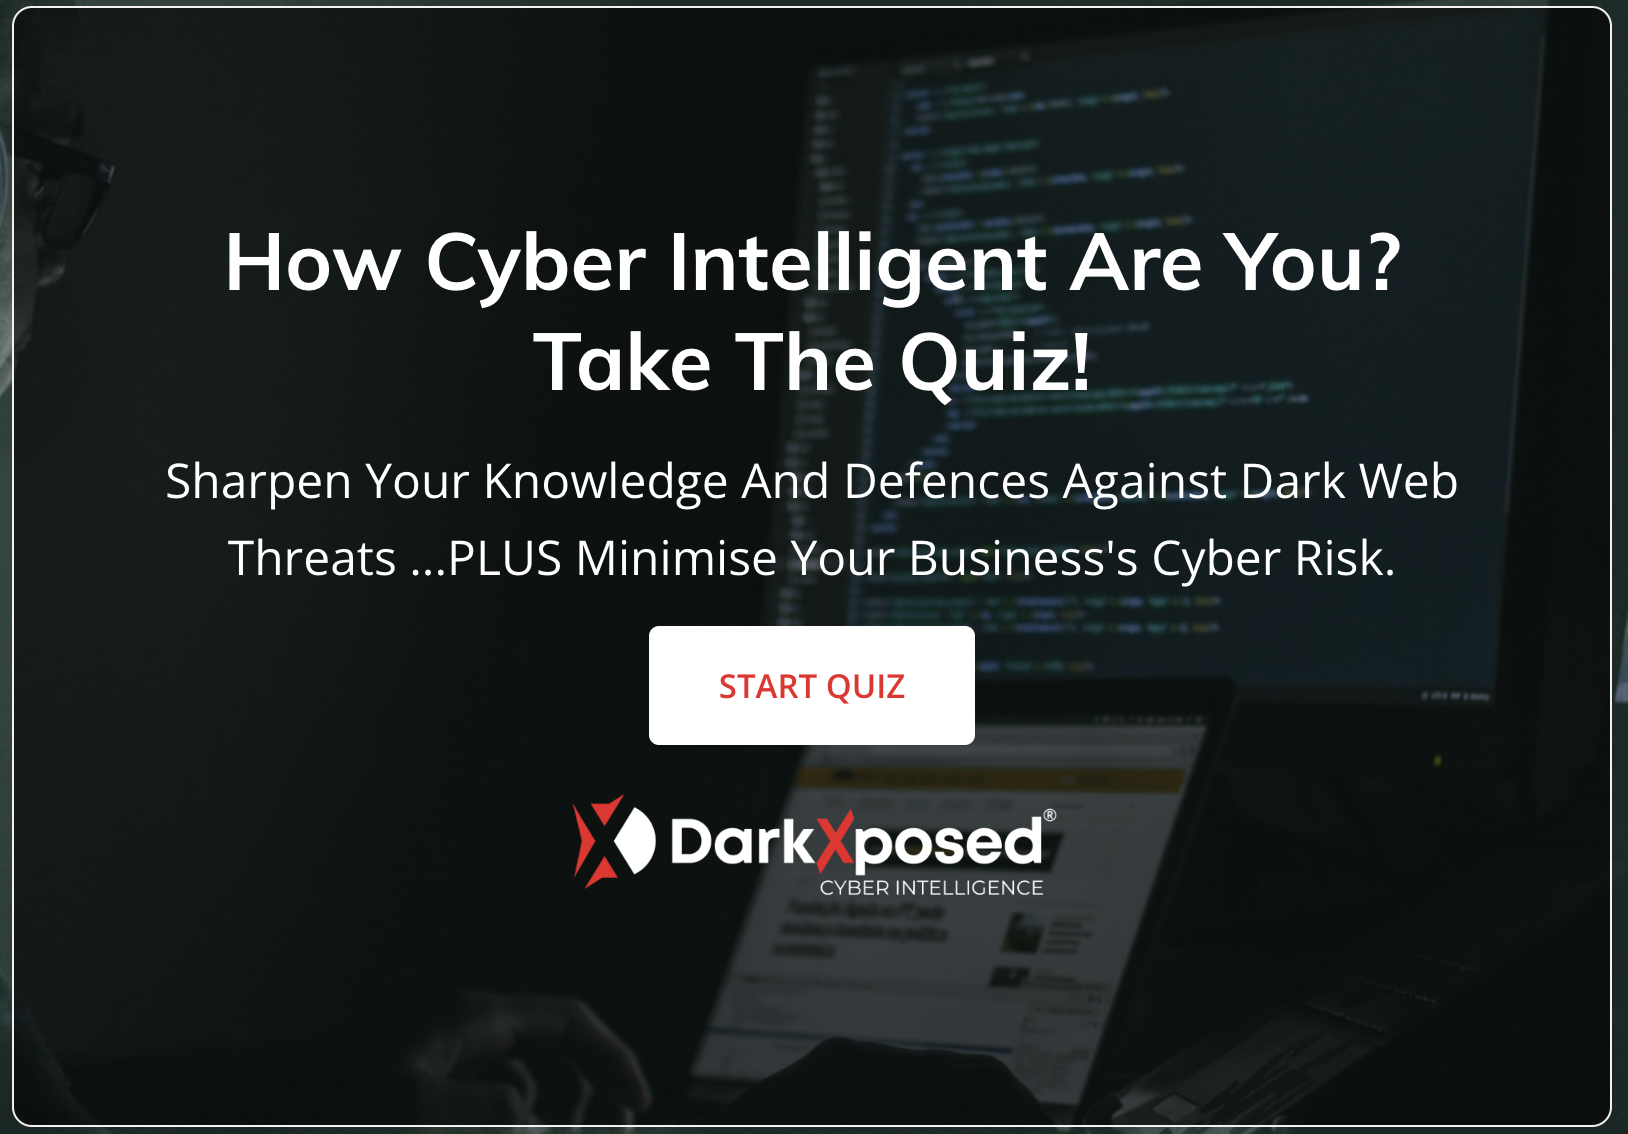 Are hackers targeting your business? Take the quiz